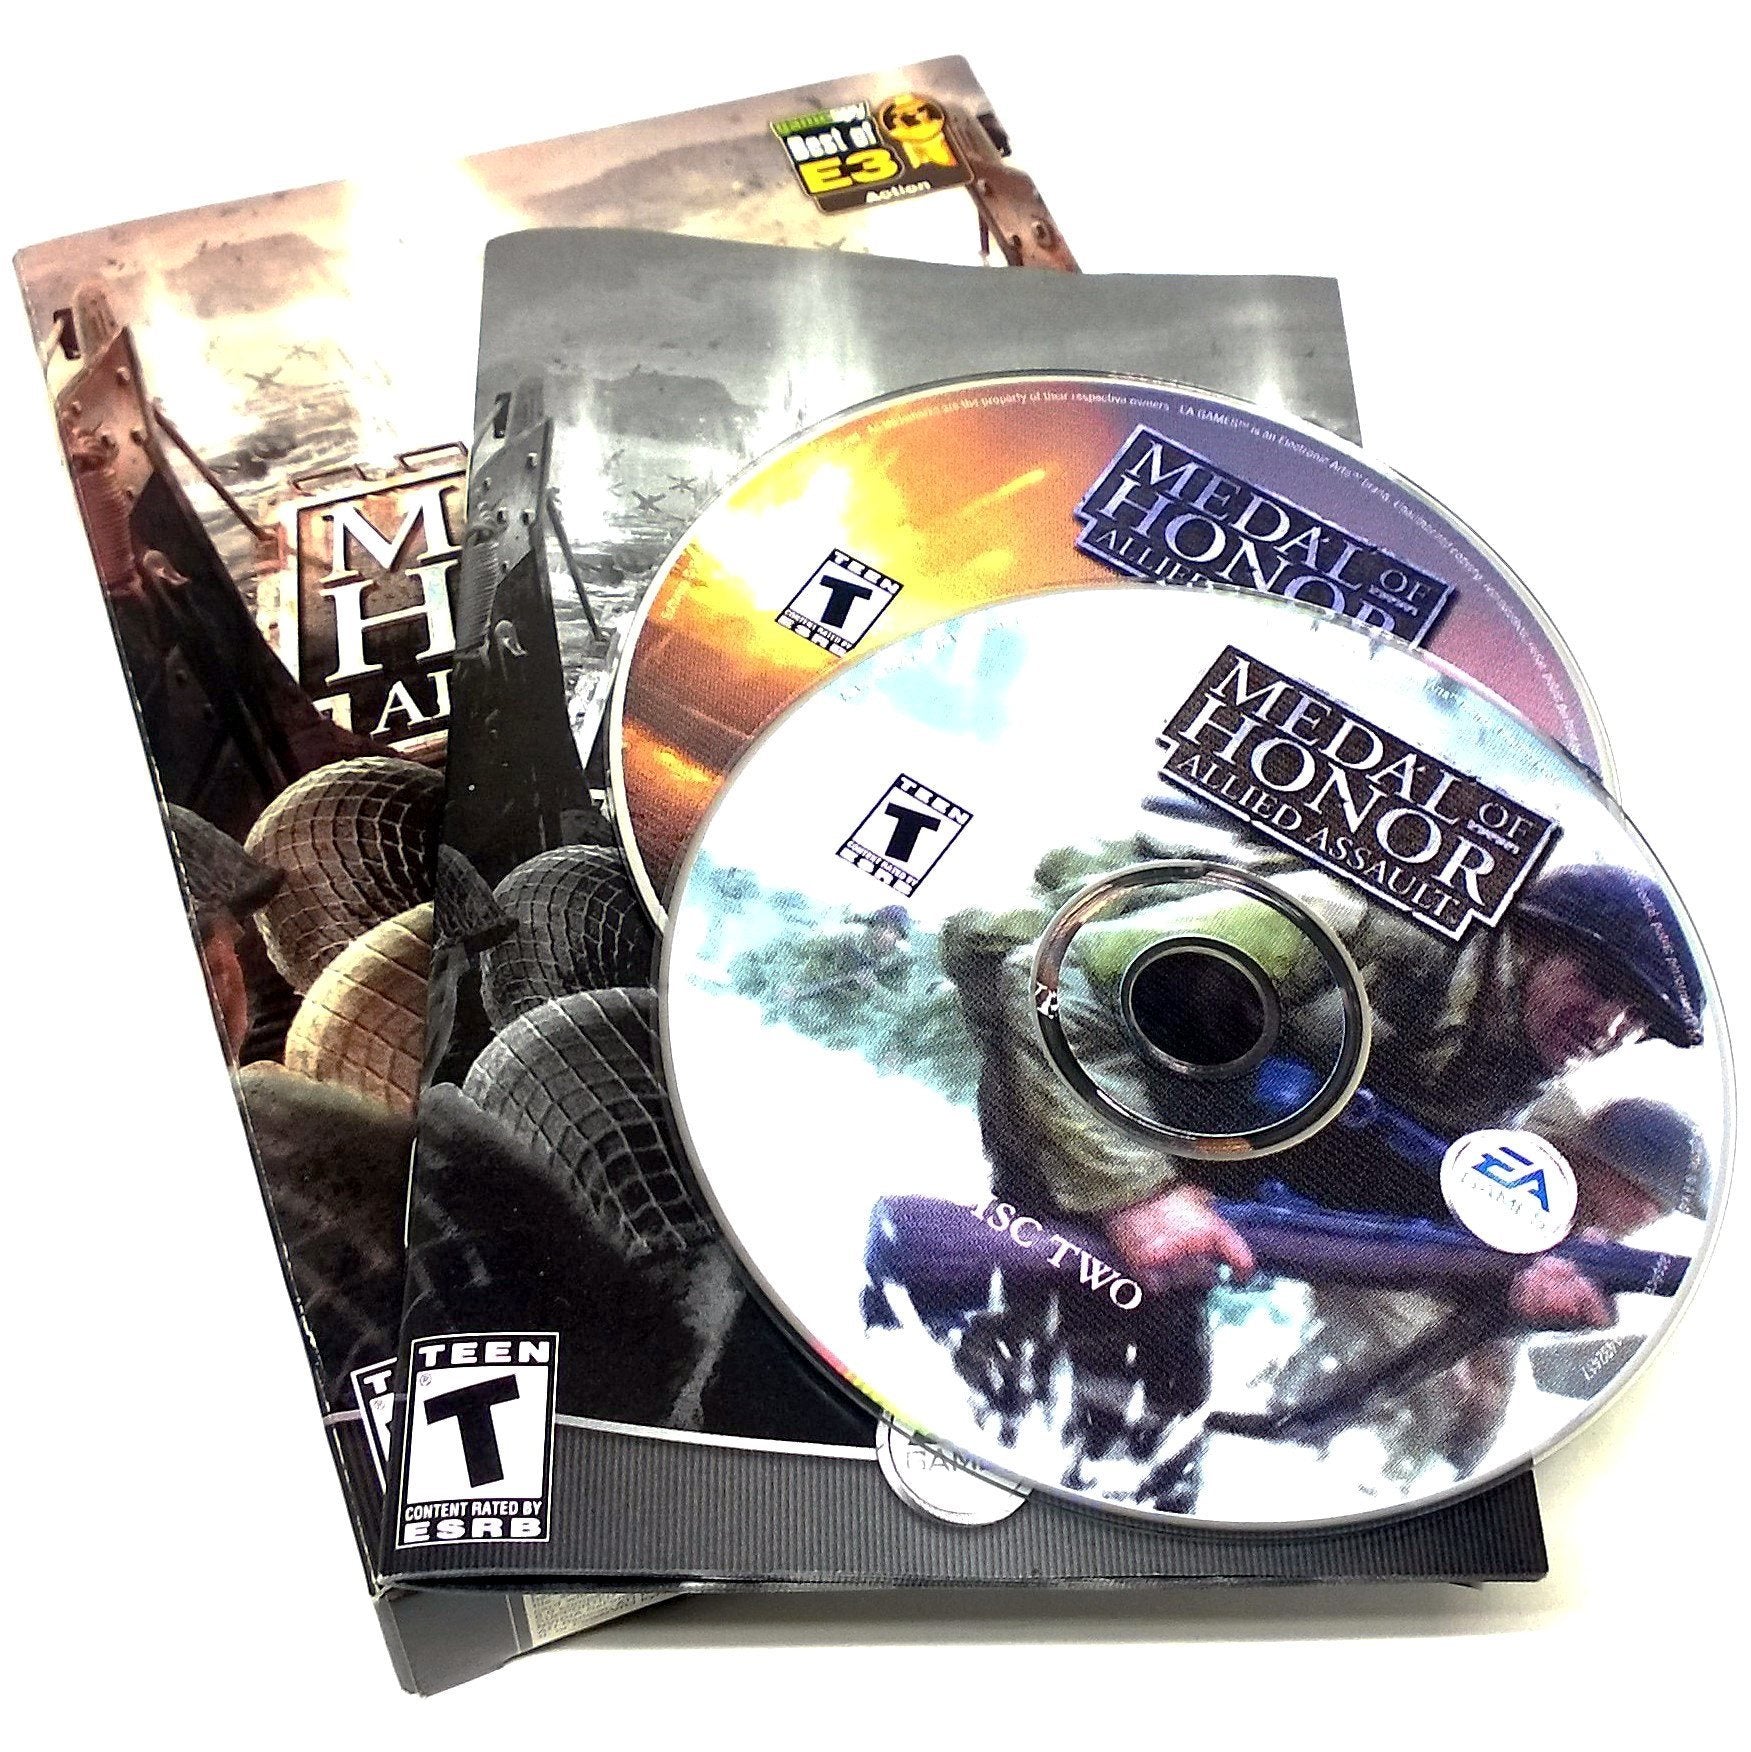 Medal of Honor: Allied Assault for PC CD-ROM